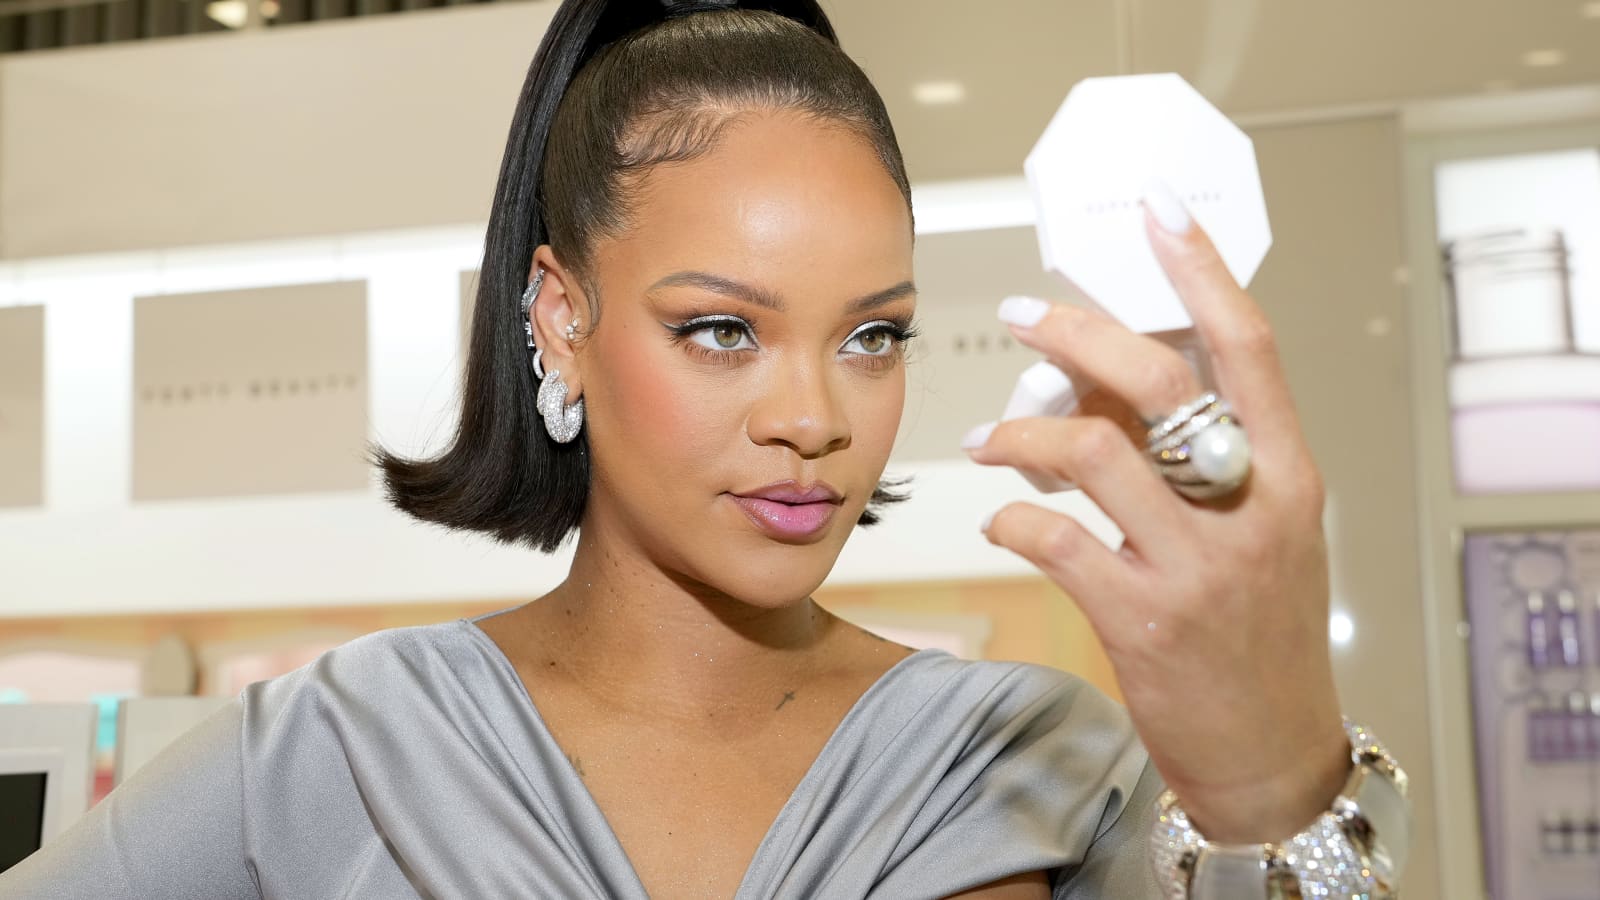 Rihanna Is Now the First Black Woman to Launch a Luxury Fashion